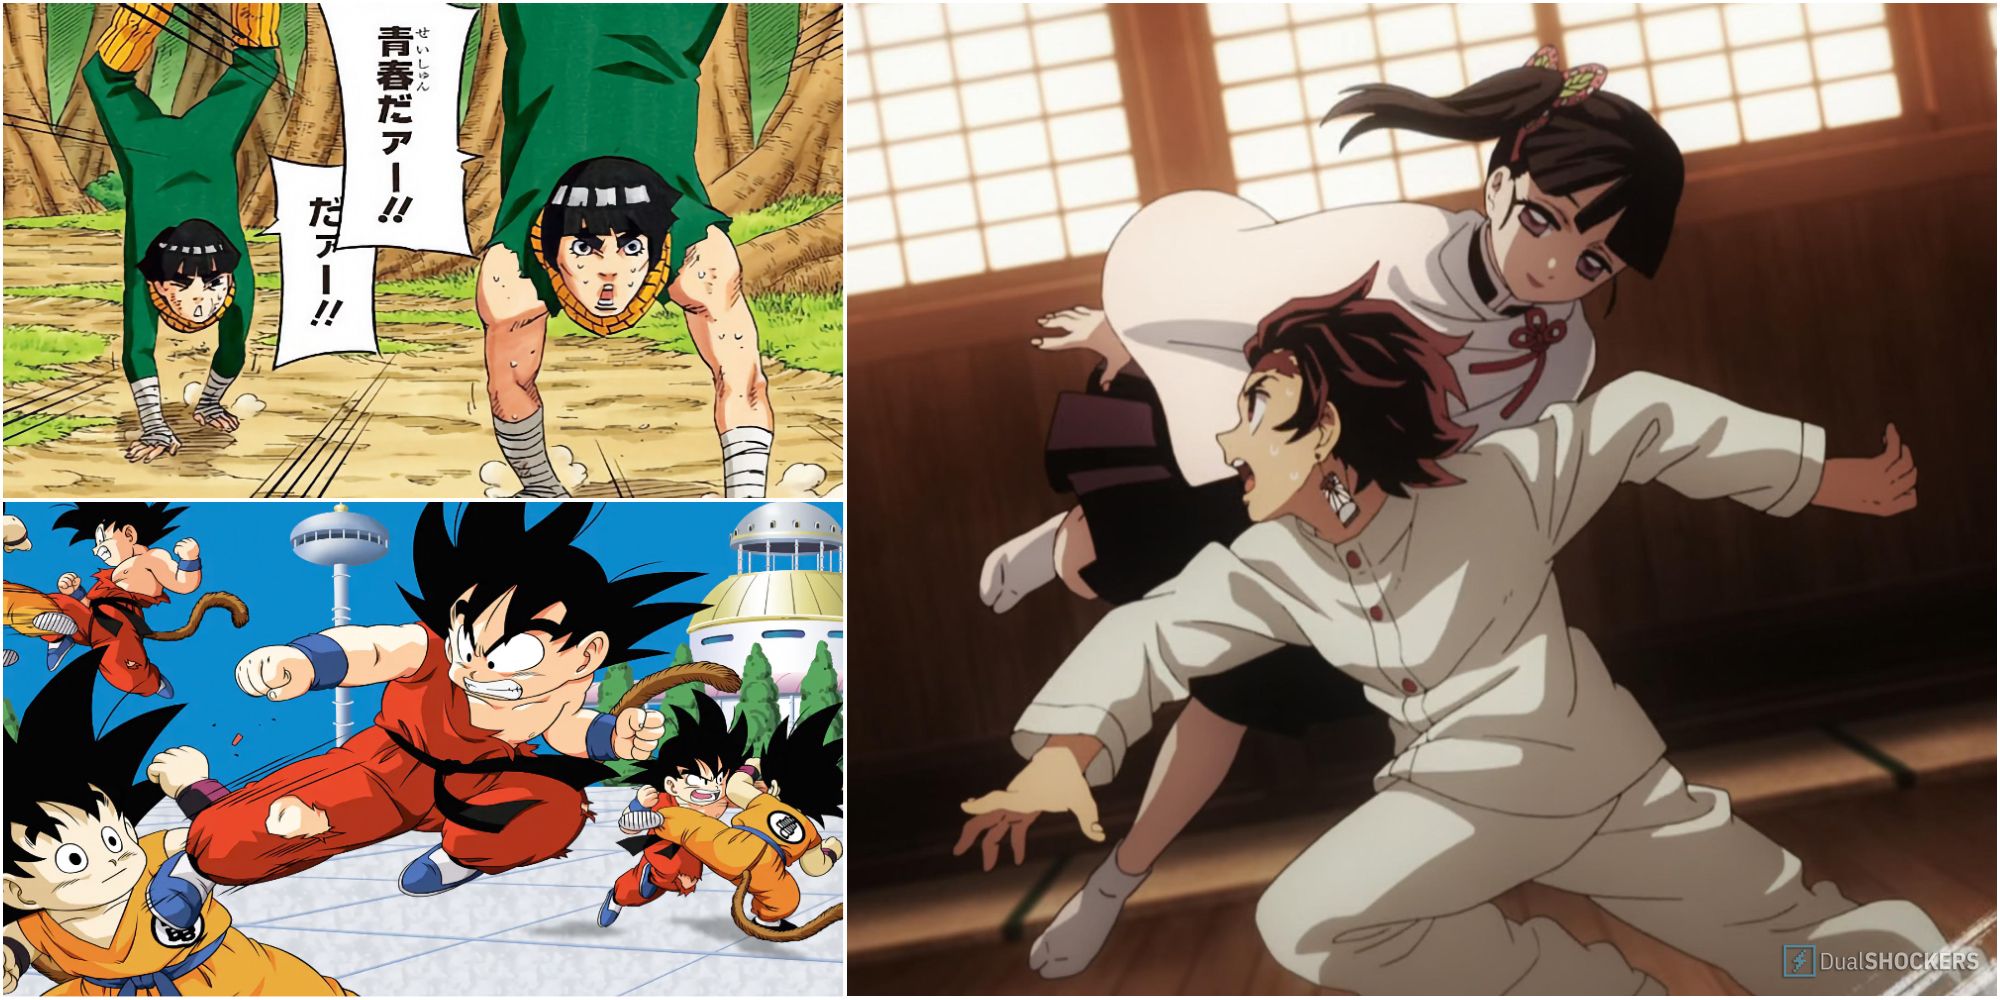 The 15 Most Insane Anime Training Sessions of All Time